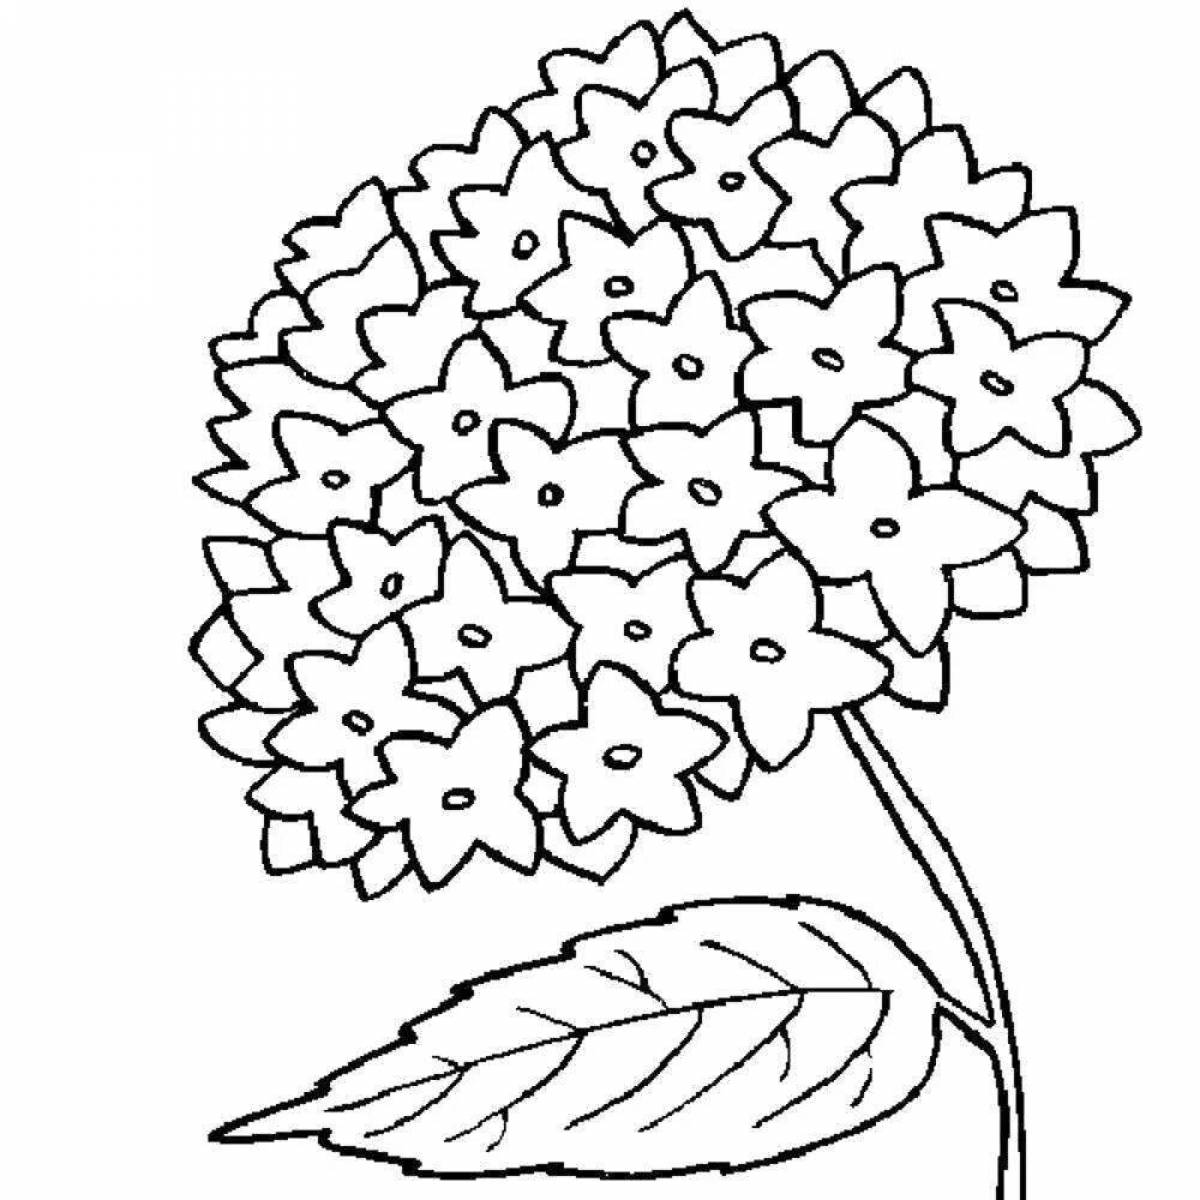 Coloring cute plants for kids